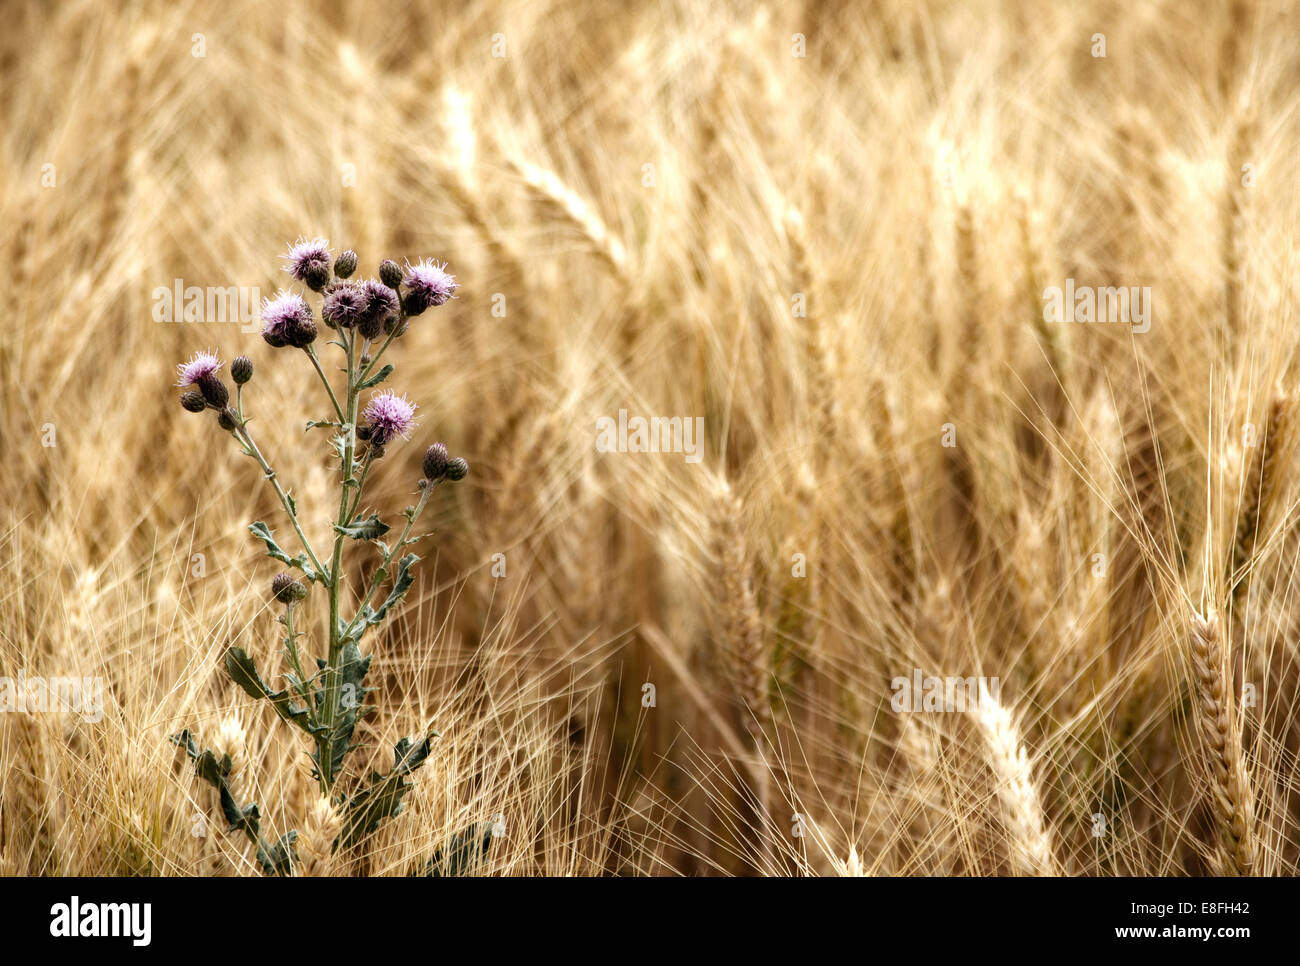 Thistle in wheat field Stock Photo